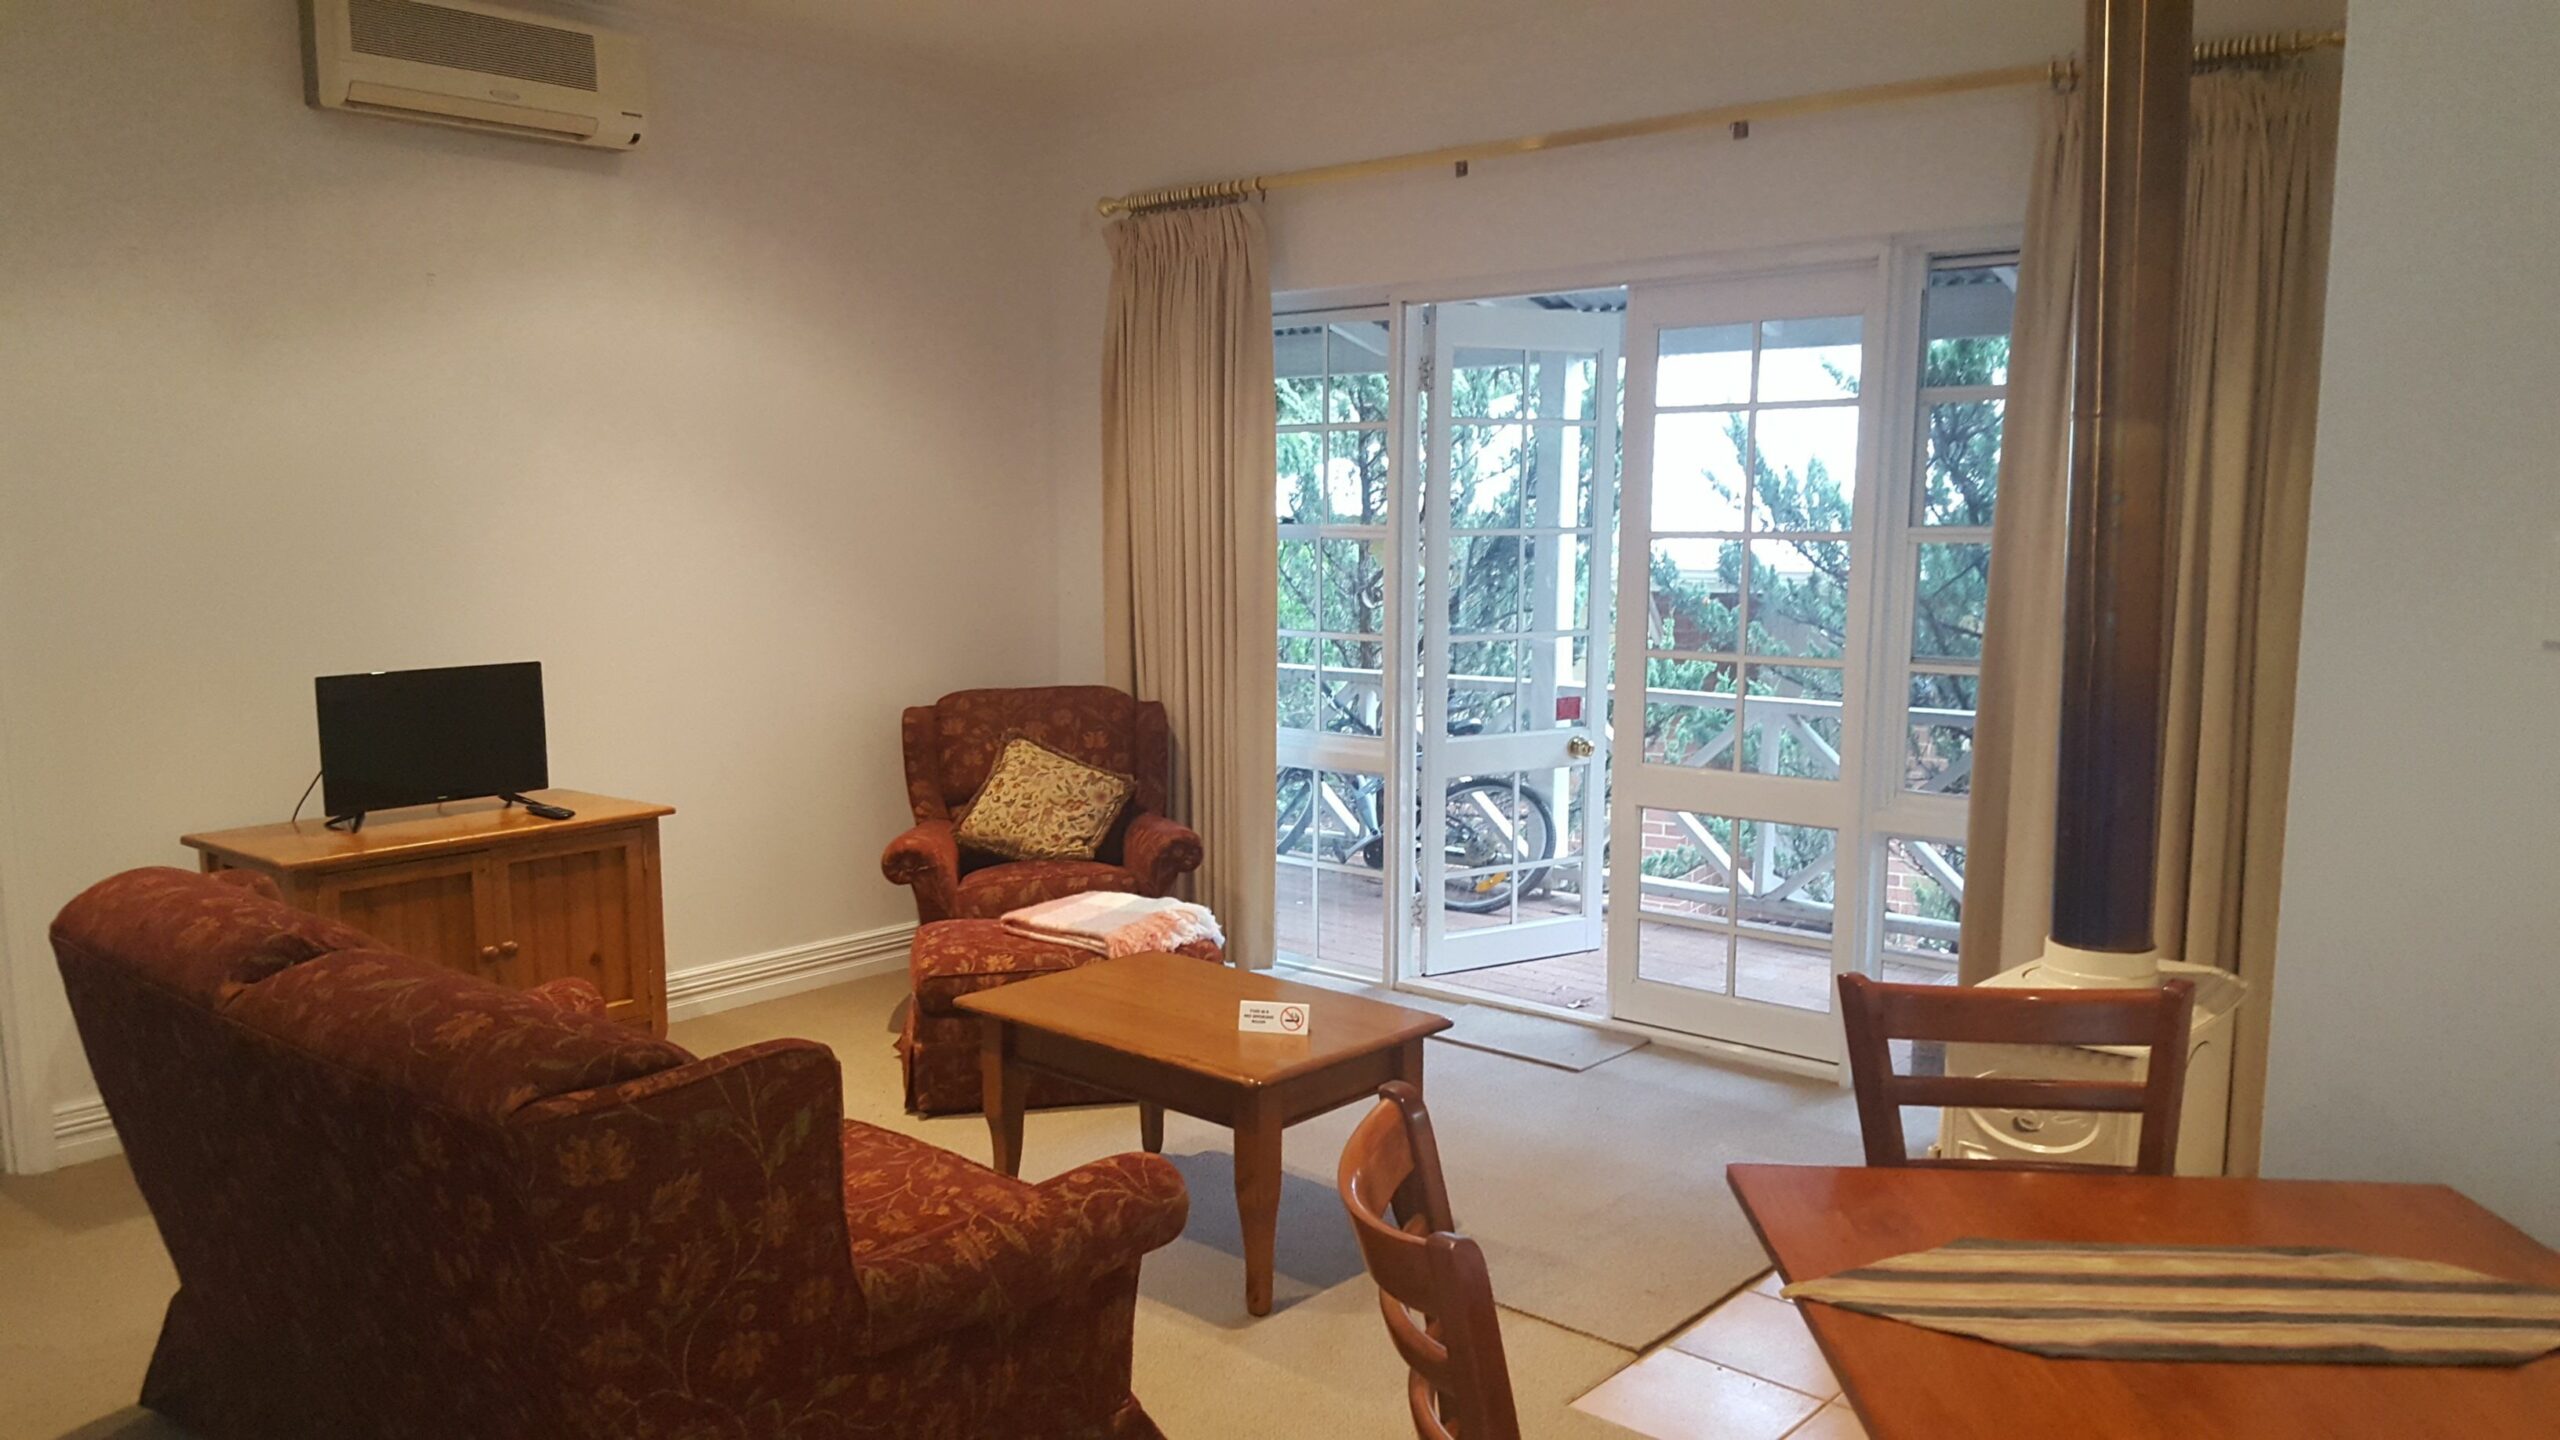 6 x One Bedroom Chalets. Private and individual. Chalets offers kitchenette